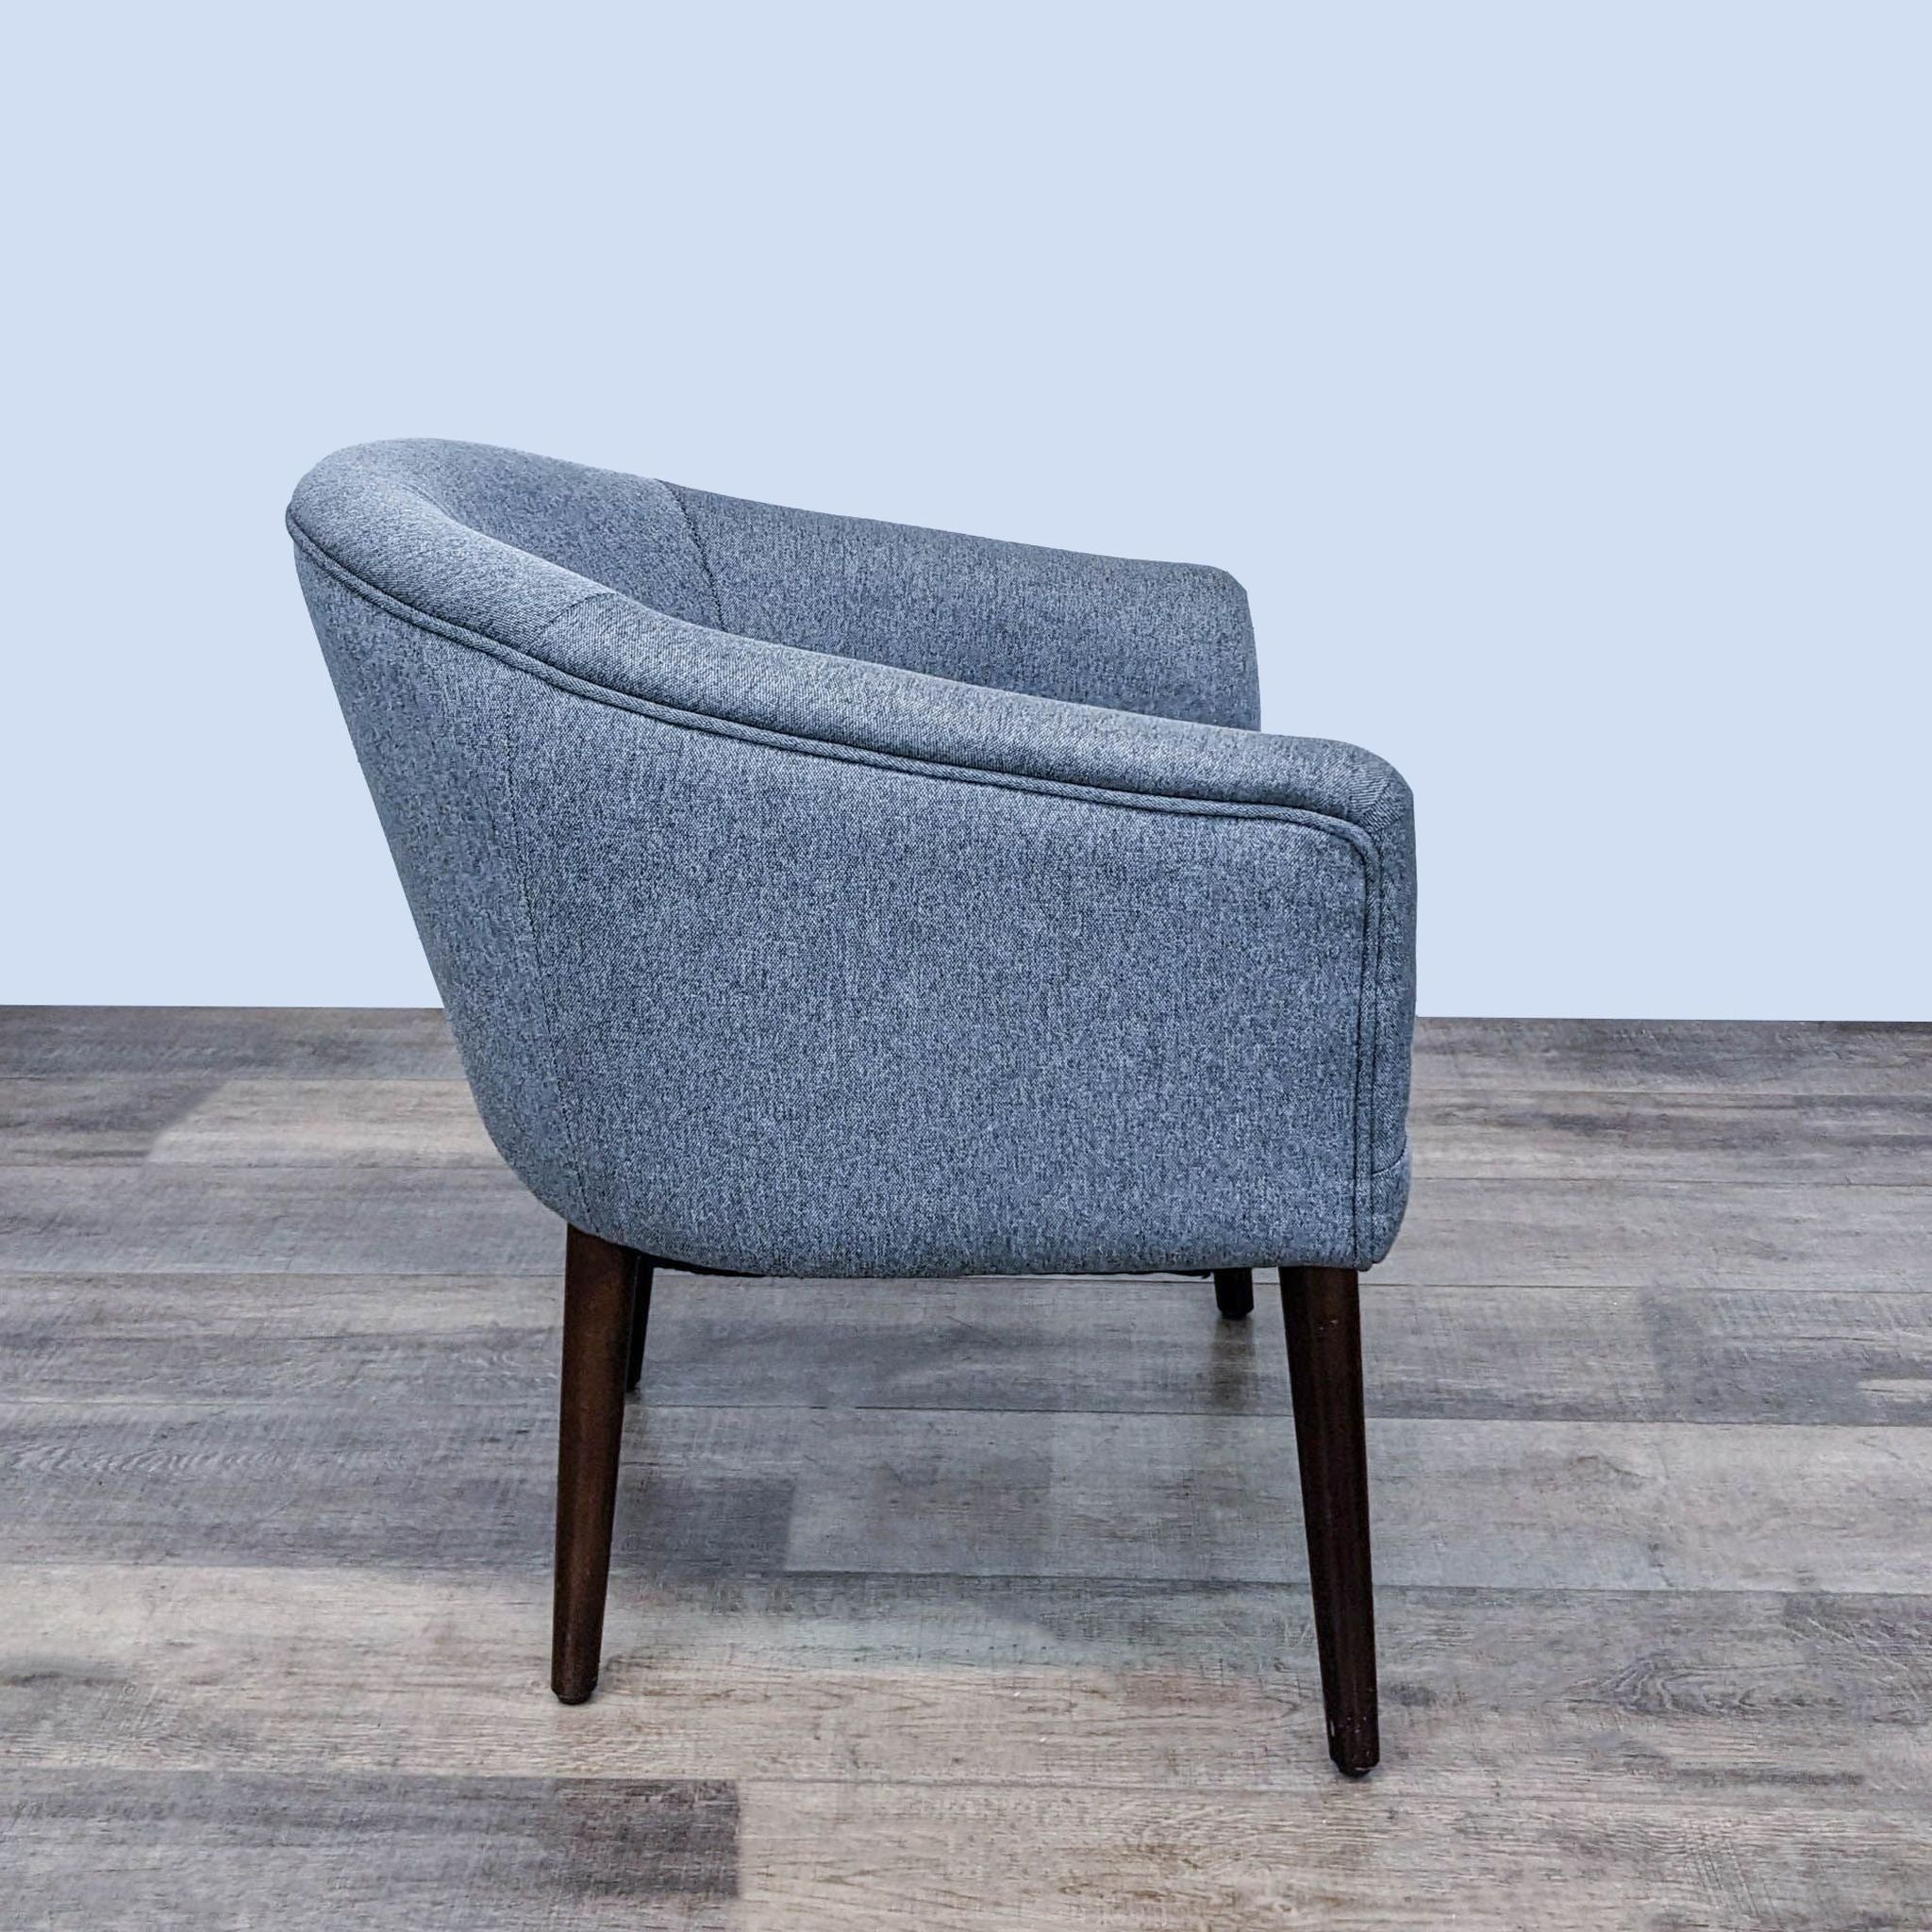 Reperch mid-century style dark gray upholstered armchair with a barrel back and tapered wood legs on a wooden floor.